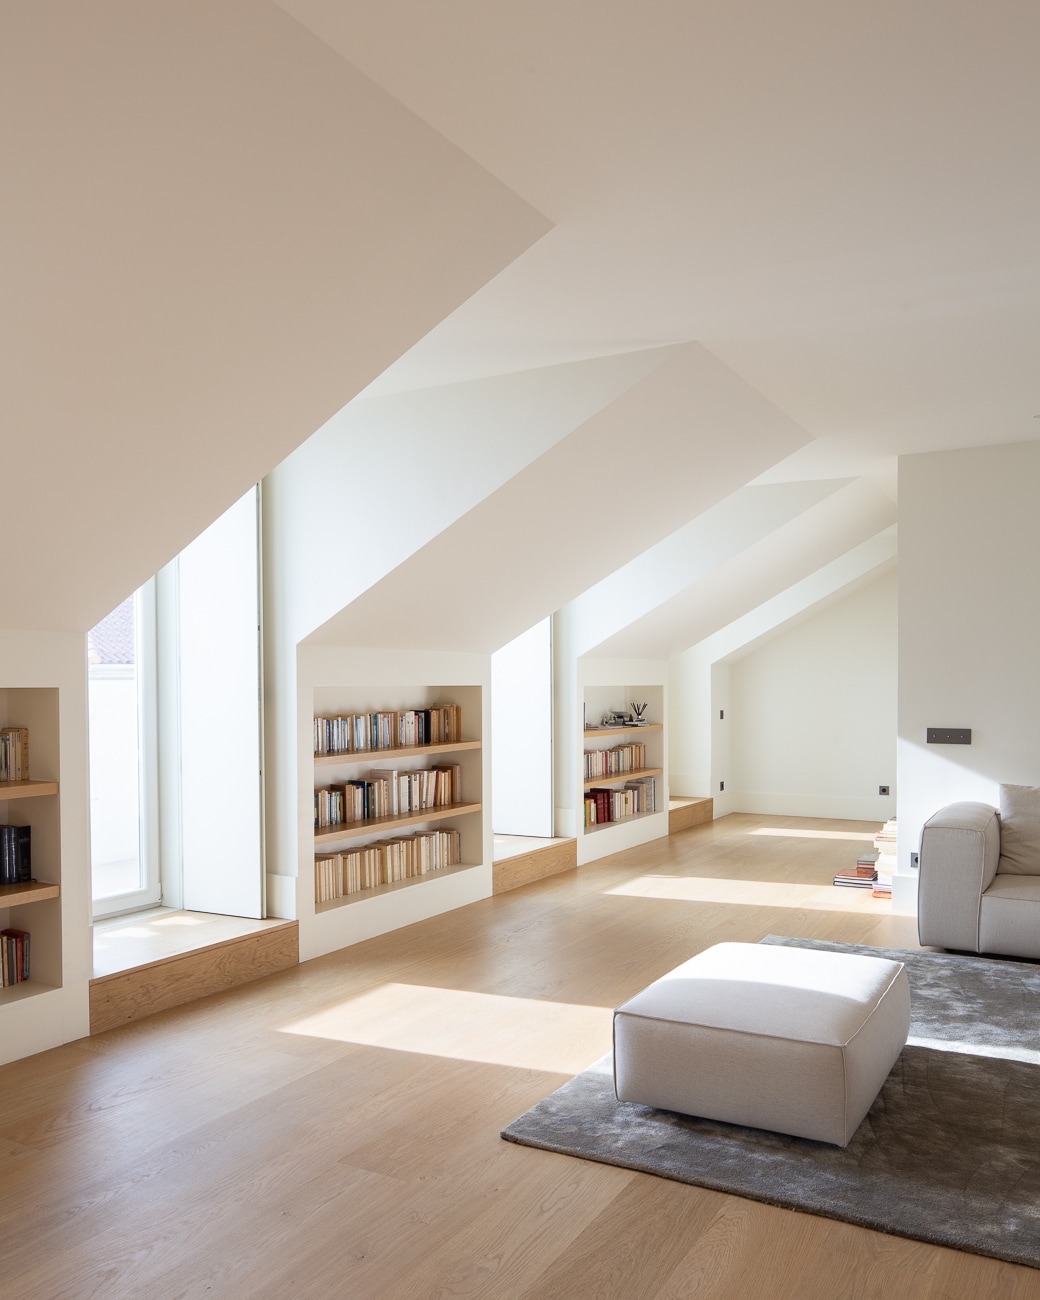 Loft or basement conversion to add value to your home